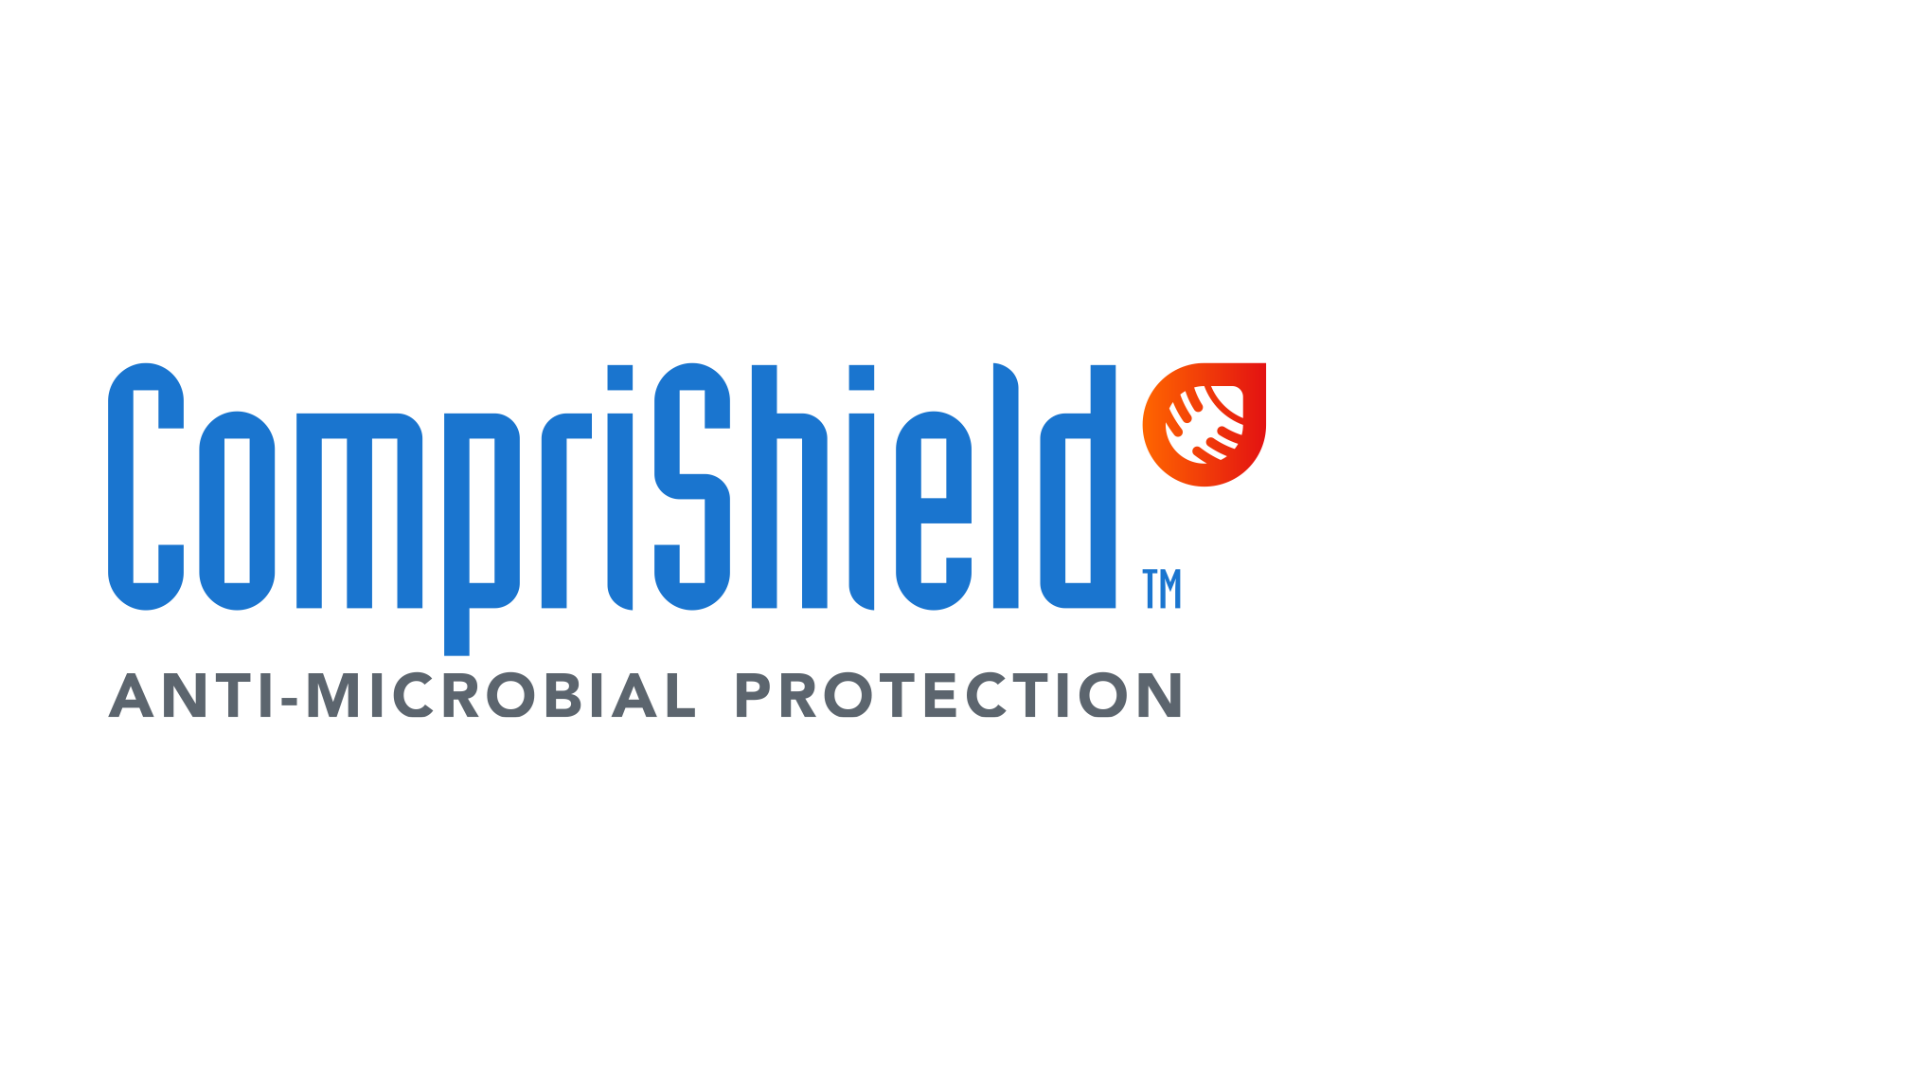 Antimicrobial - CompriShield is a sustainable, bio-based microbial control solution that is derived from coconut oil. It provides antibacterial odour protection as well as mould and mildew resistance, keeping products clean and safe for their lifetime.All Joyce comfort foams are infused with CompriShield during the manufacturing process.